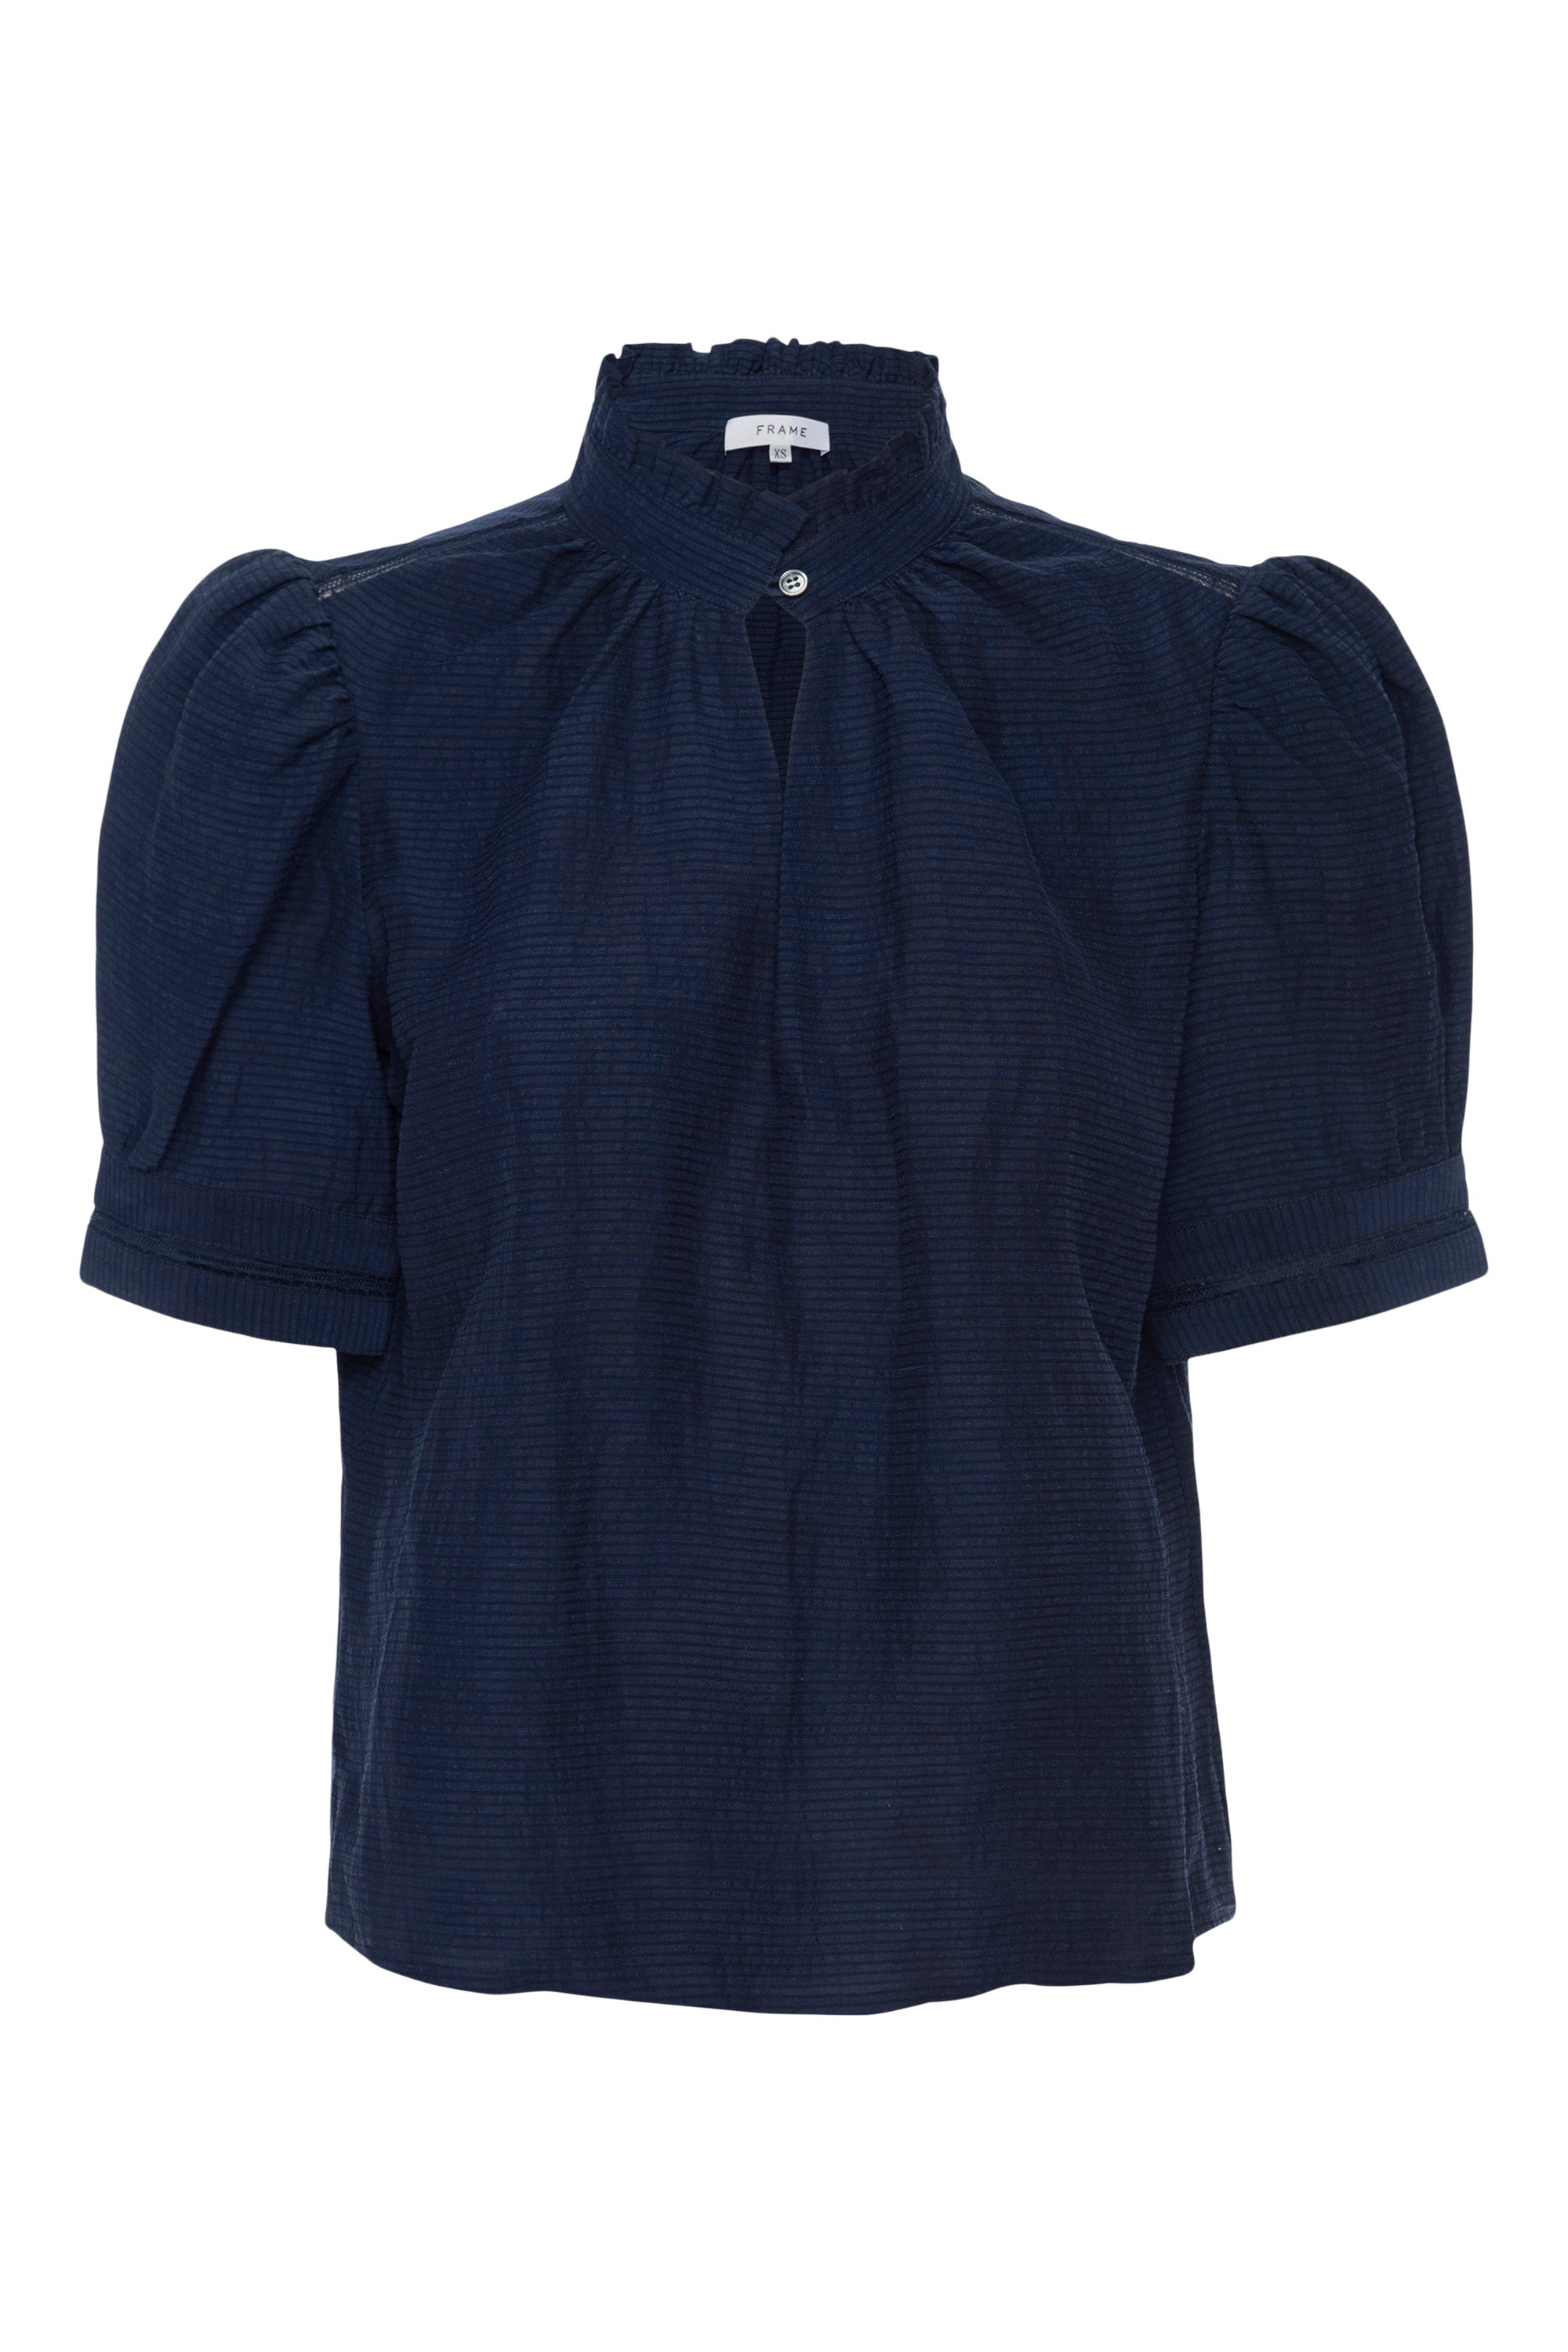 Frame Denim Ruffle Collar Inset Lace Top 
in Navy